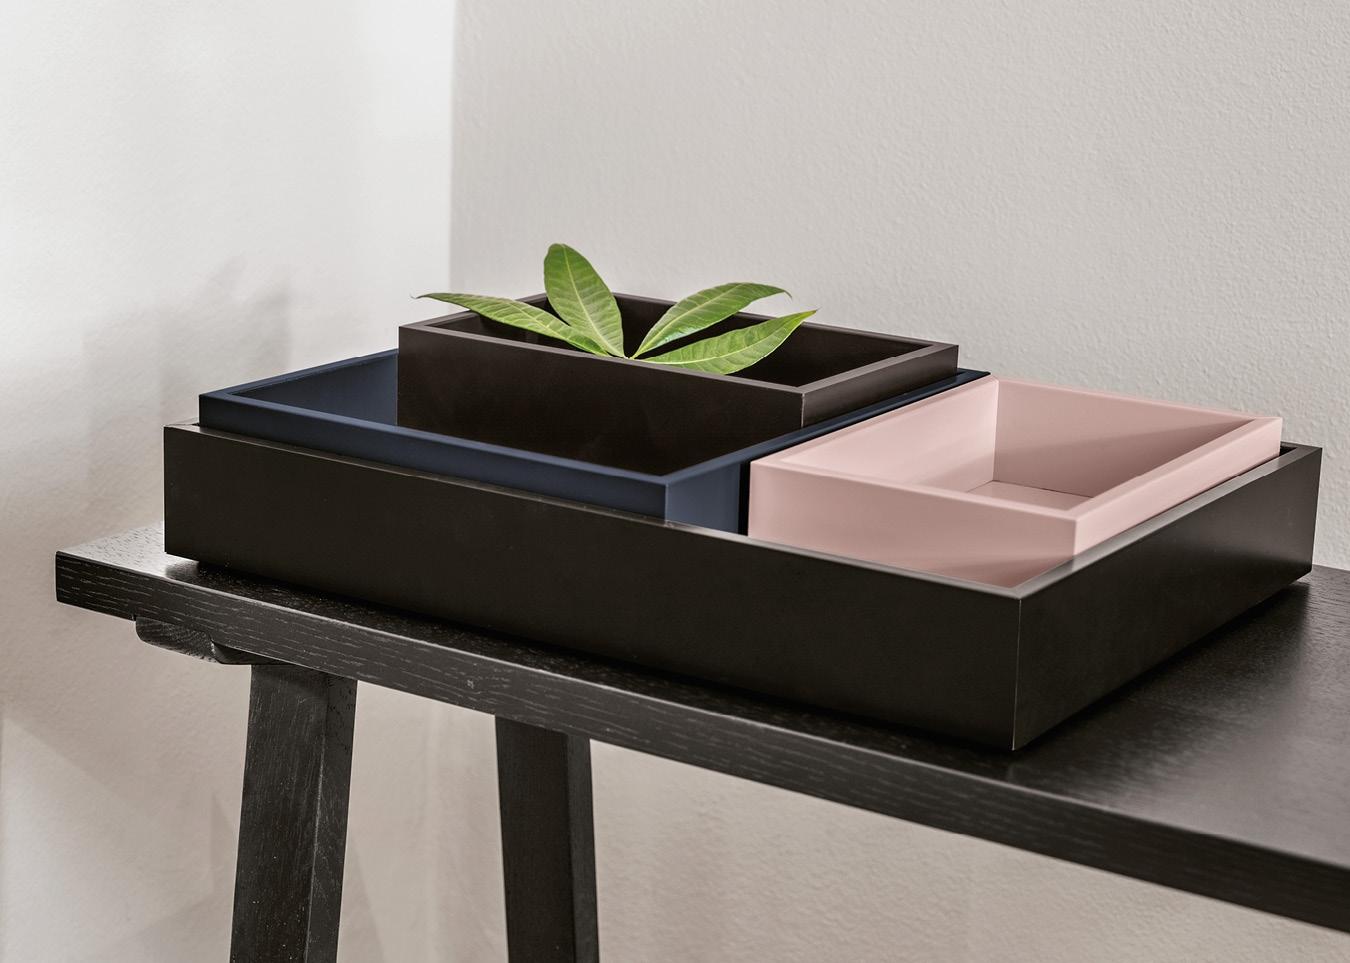 NEW Schonbuch Black Box L Tally
TALLY is a versatile tray and comes in a choice of interesting lacquer colours and three different sizes. Alone or in a group, side by side or one inside the other, TALLY offers inspiration for creative arrangements